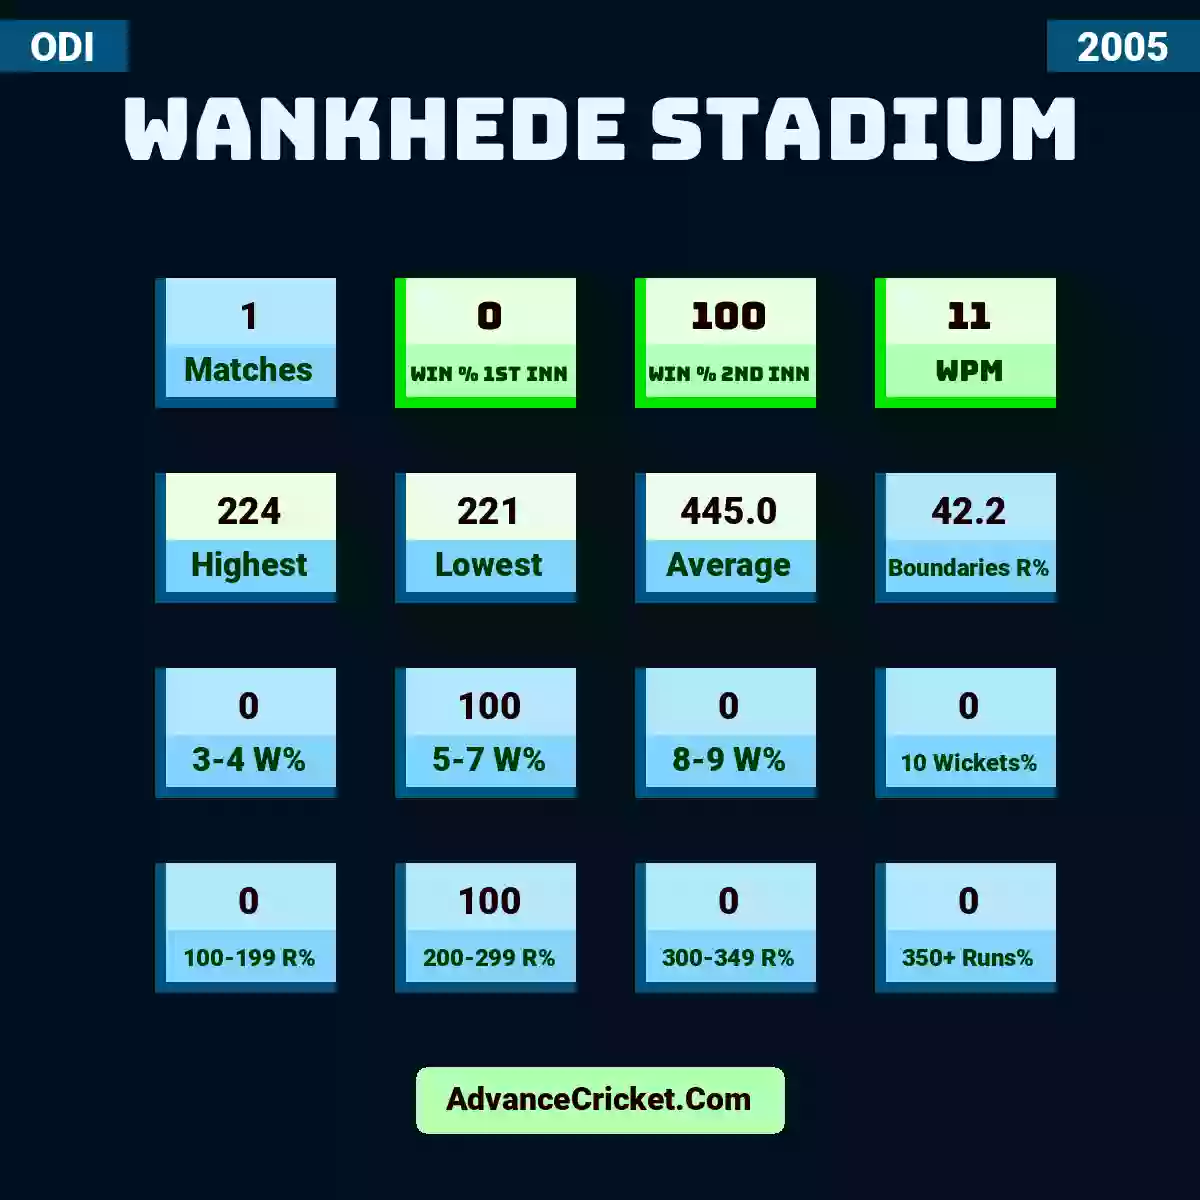 Image showing Wankhede Stadium with Matches: 1, Win % 1st Inn: 0, Win % 2nd Inn: 100, WPM: 11, Highest: 224, Lowest: 221, Average: 445.0, Boundaries R%: 42.2, 3-4 W%: 0, 5-7 W%: 100, 8-9 W%: 0, 10 Wickets%: 0, 100-199 R%: 0, 200-299 R%: 100, 300-349 R%: 0, 350+ Runs%: 0.